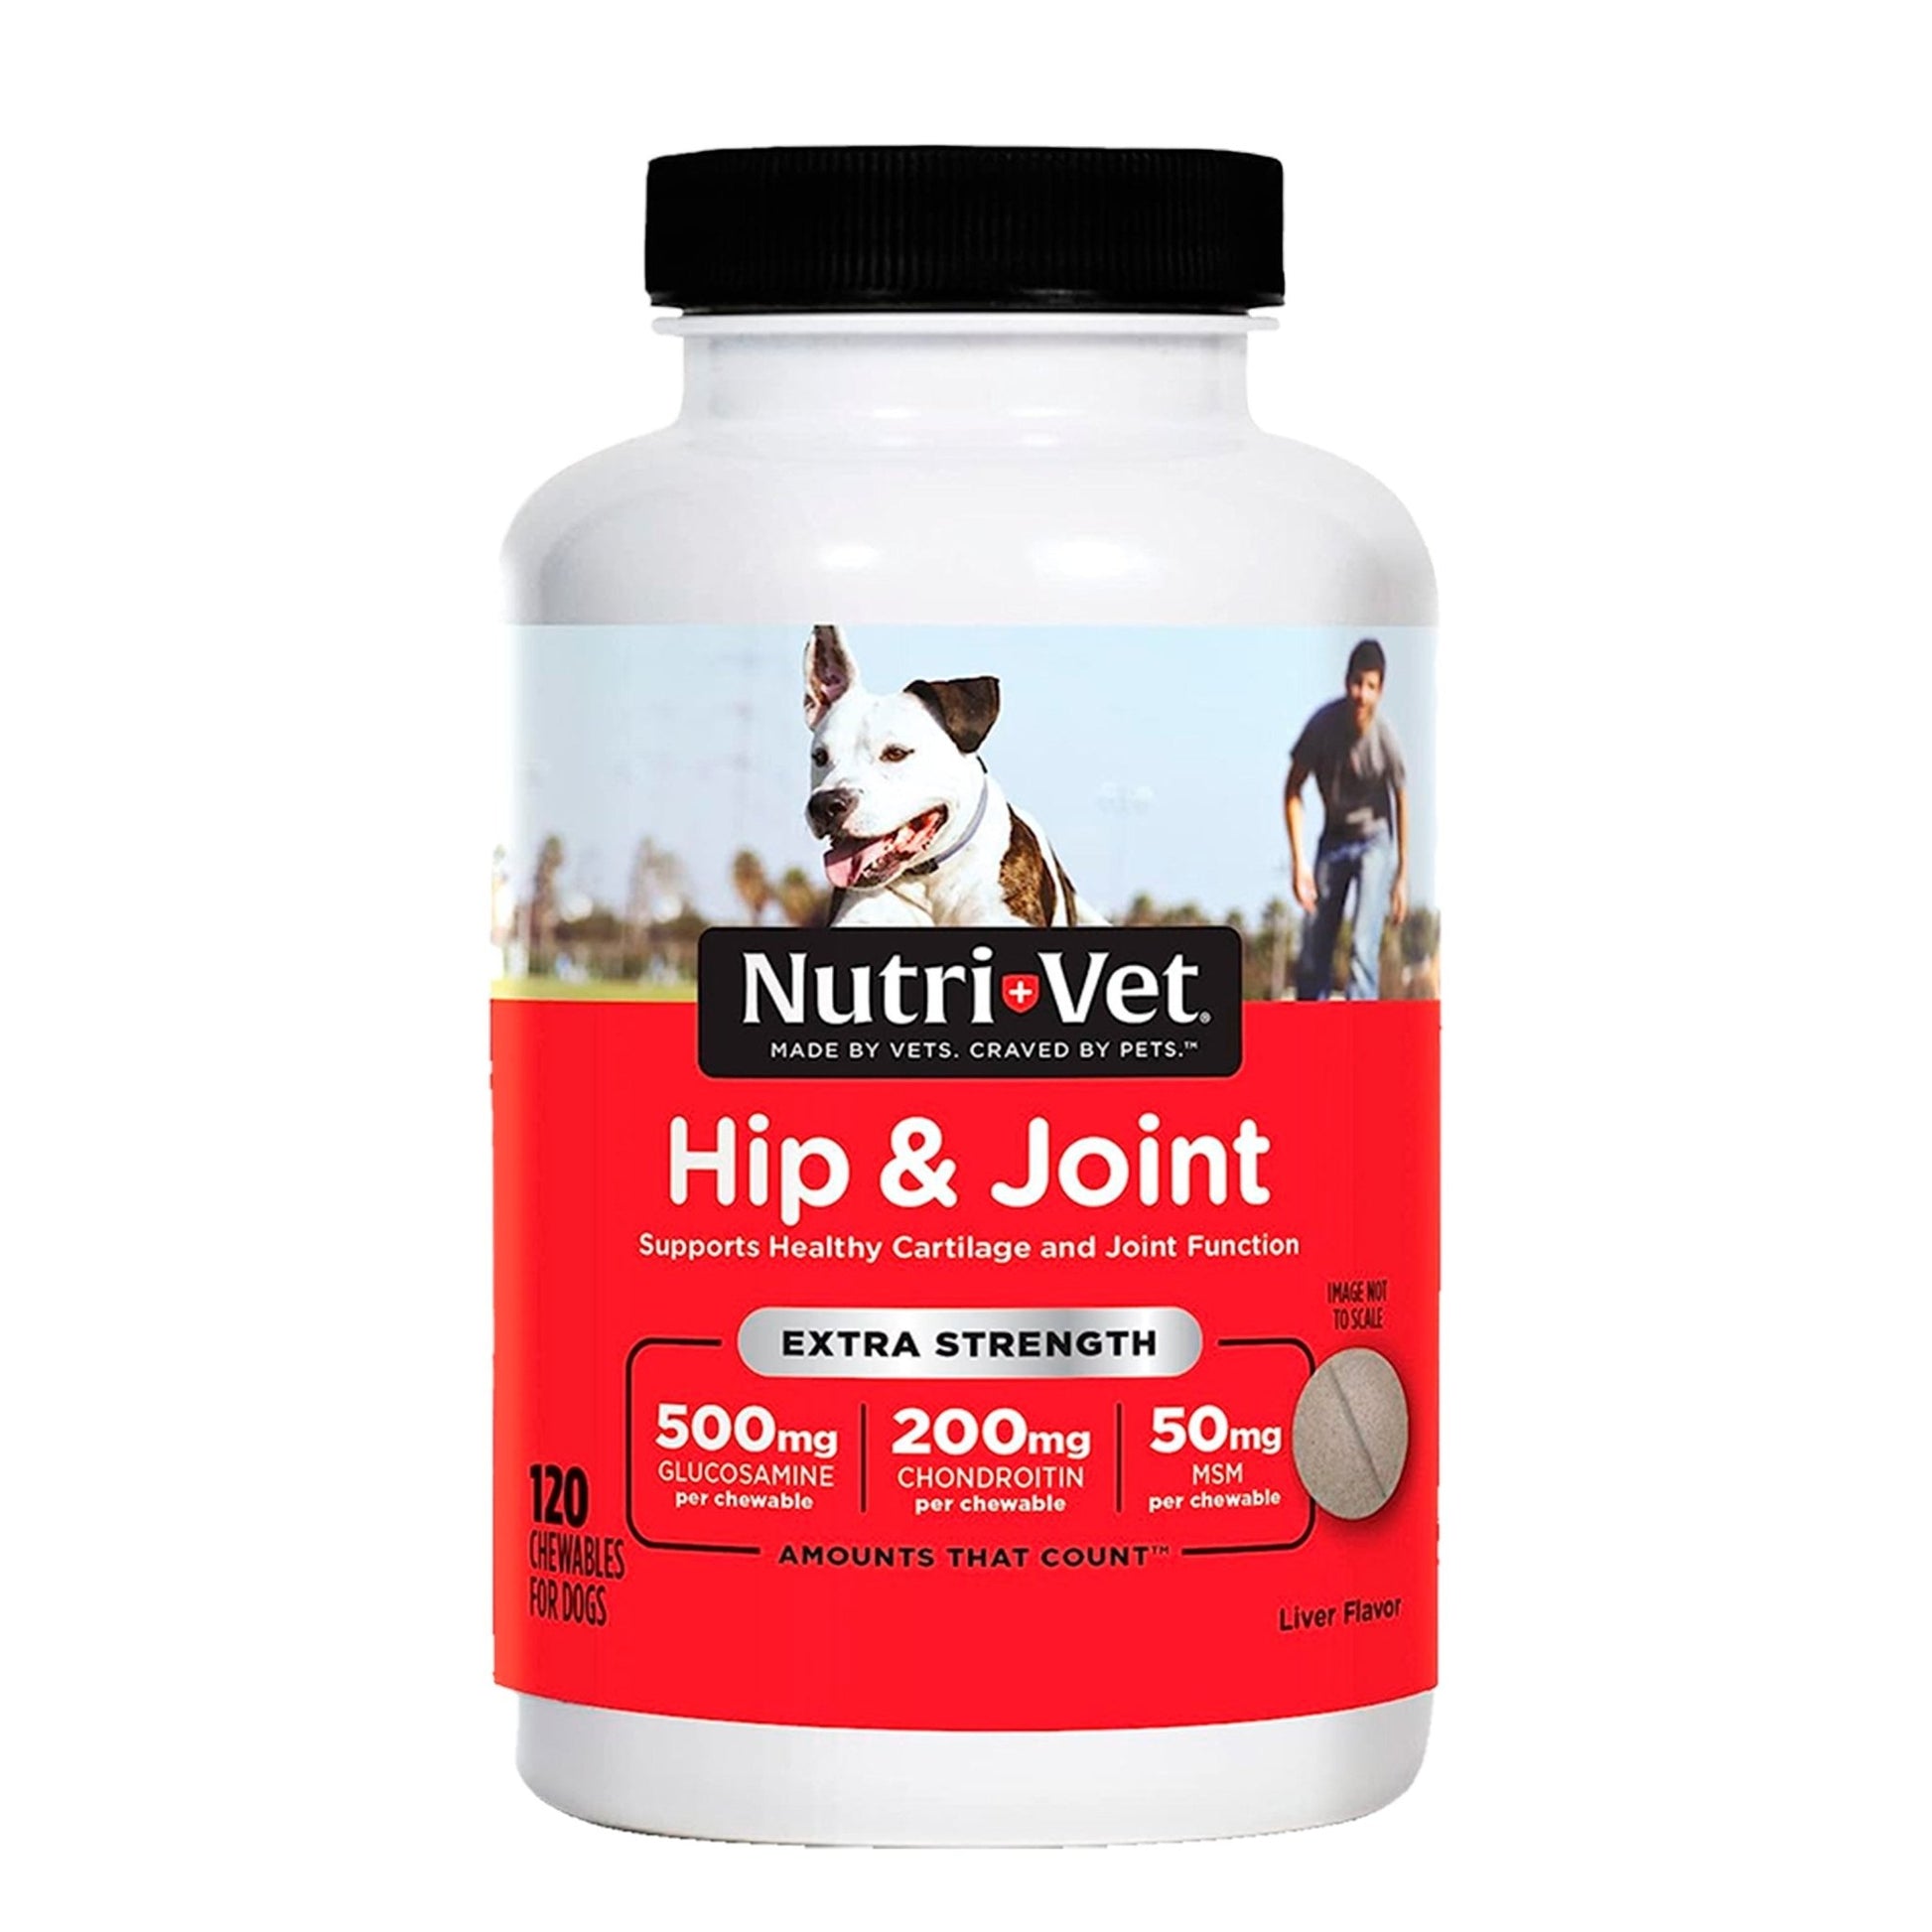 Nutri-Vet Hip & Joint Extra Strength Chewables for Dogs, Liver, 120ct - Kwik Pets